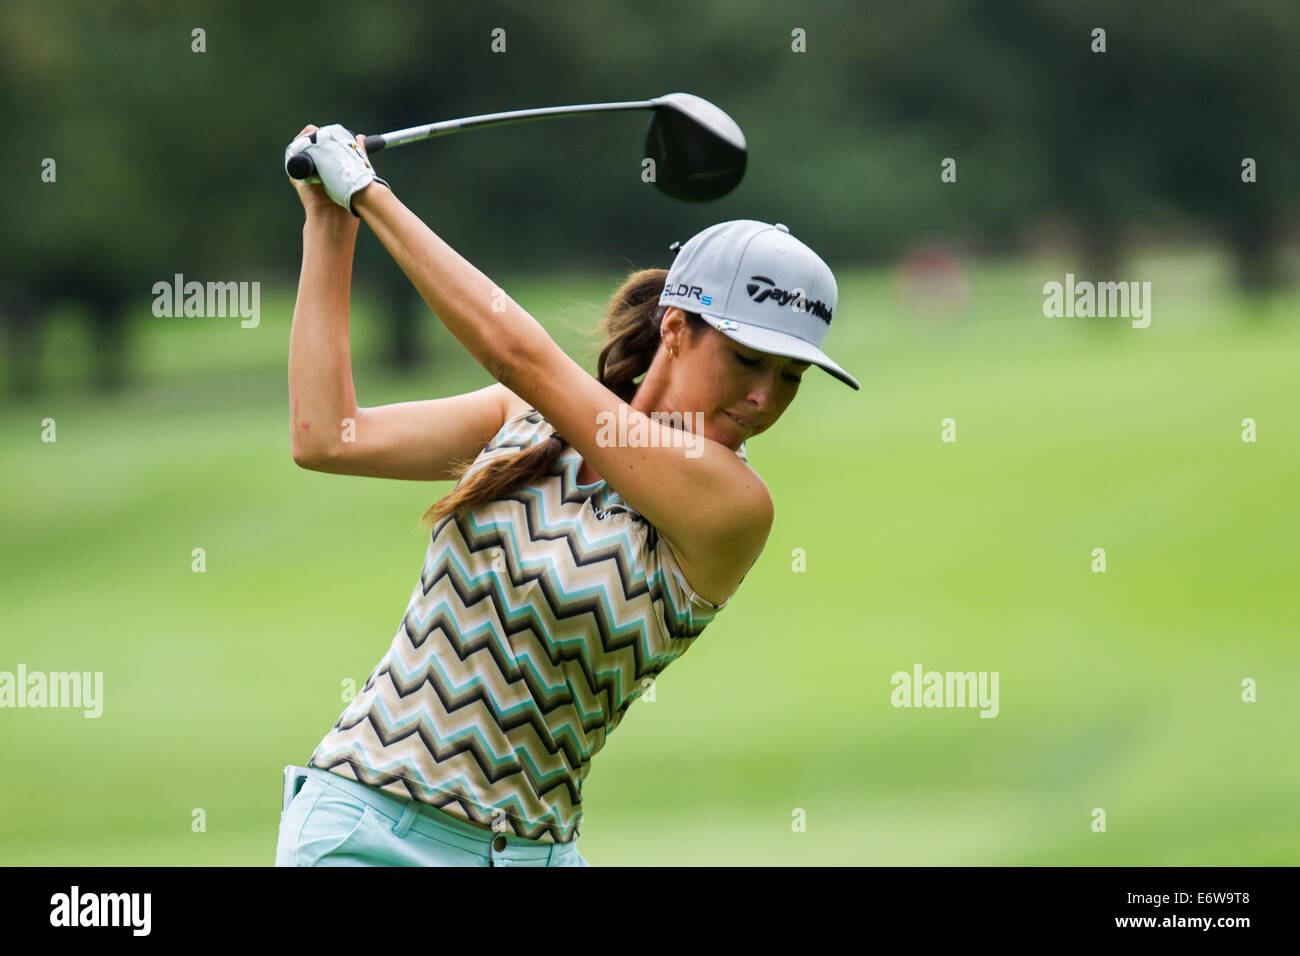 Portland, OR, USA. 30th Aug, 2014. JAYE MARIE GREEN tees off during the LPGA Portland Classic at Columbia Edgewater Country Club in Portland, OR on August 30, 2014. © David Blair/ZUMA Wire/Alamy Live News Stock Photo